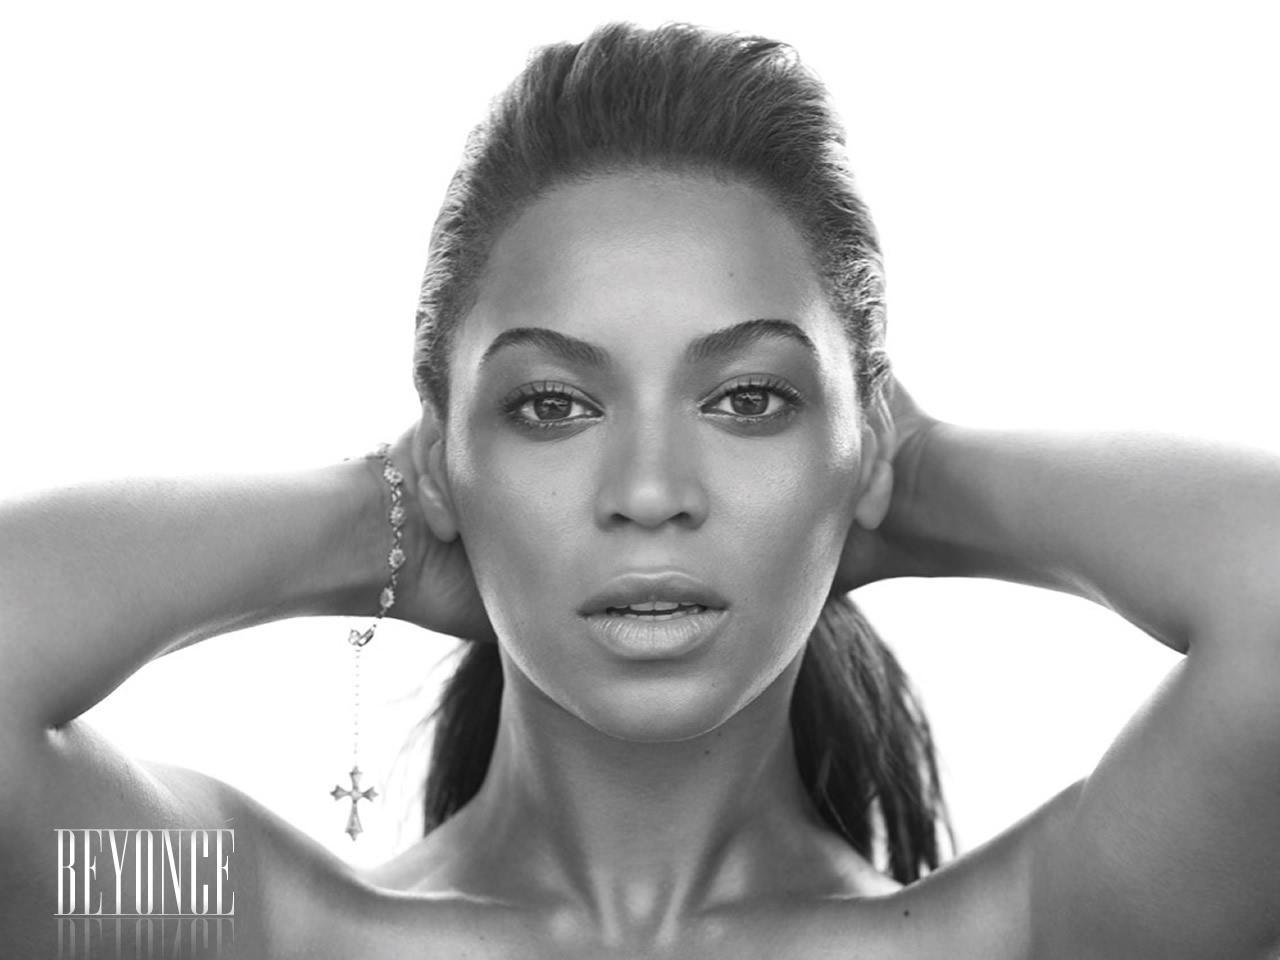 Beyonce Black And White Wallpaper 39833 in Celebrities F